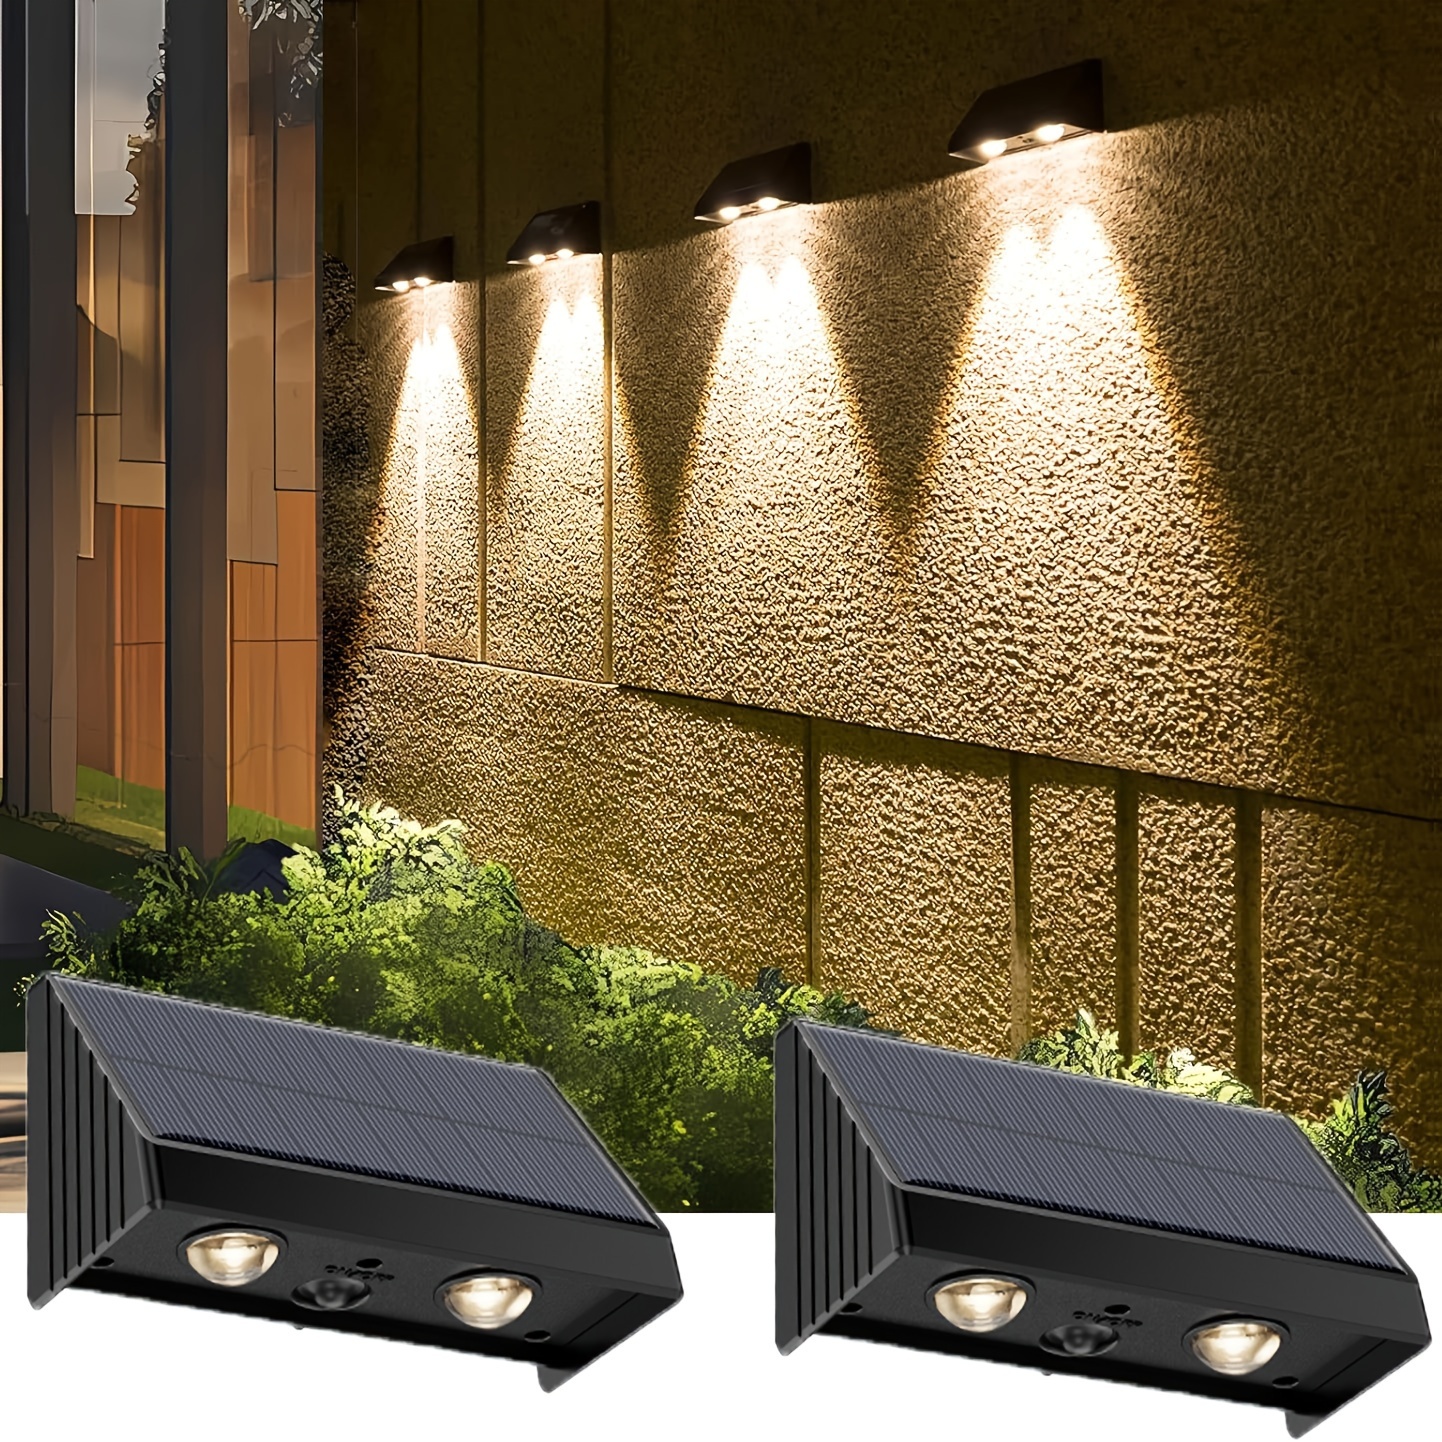 

Solar Lights Outdoor, 2 Pack Solar Fence Lights Warm White Down Solar Wall Lights, 100 Lumens Super Bright Dusk To Dawn Deck Light For Yard/railing/wall/step/patio/porch